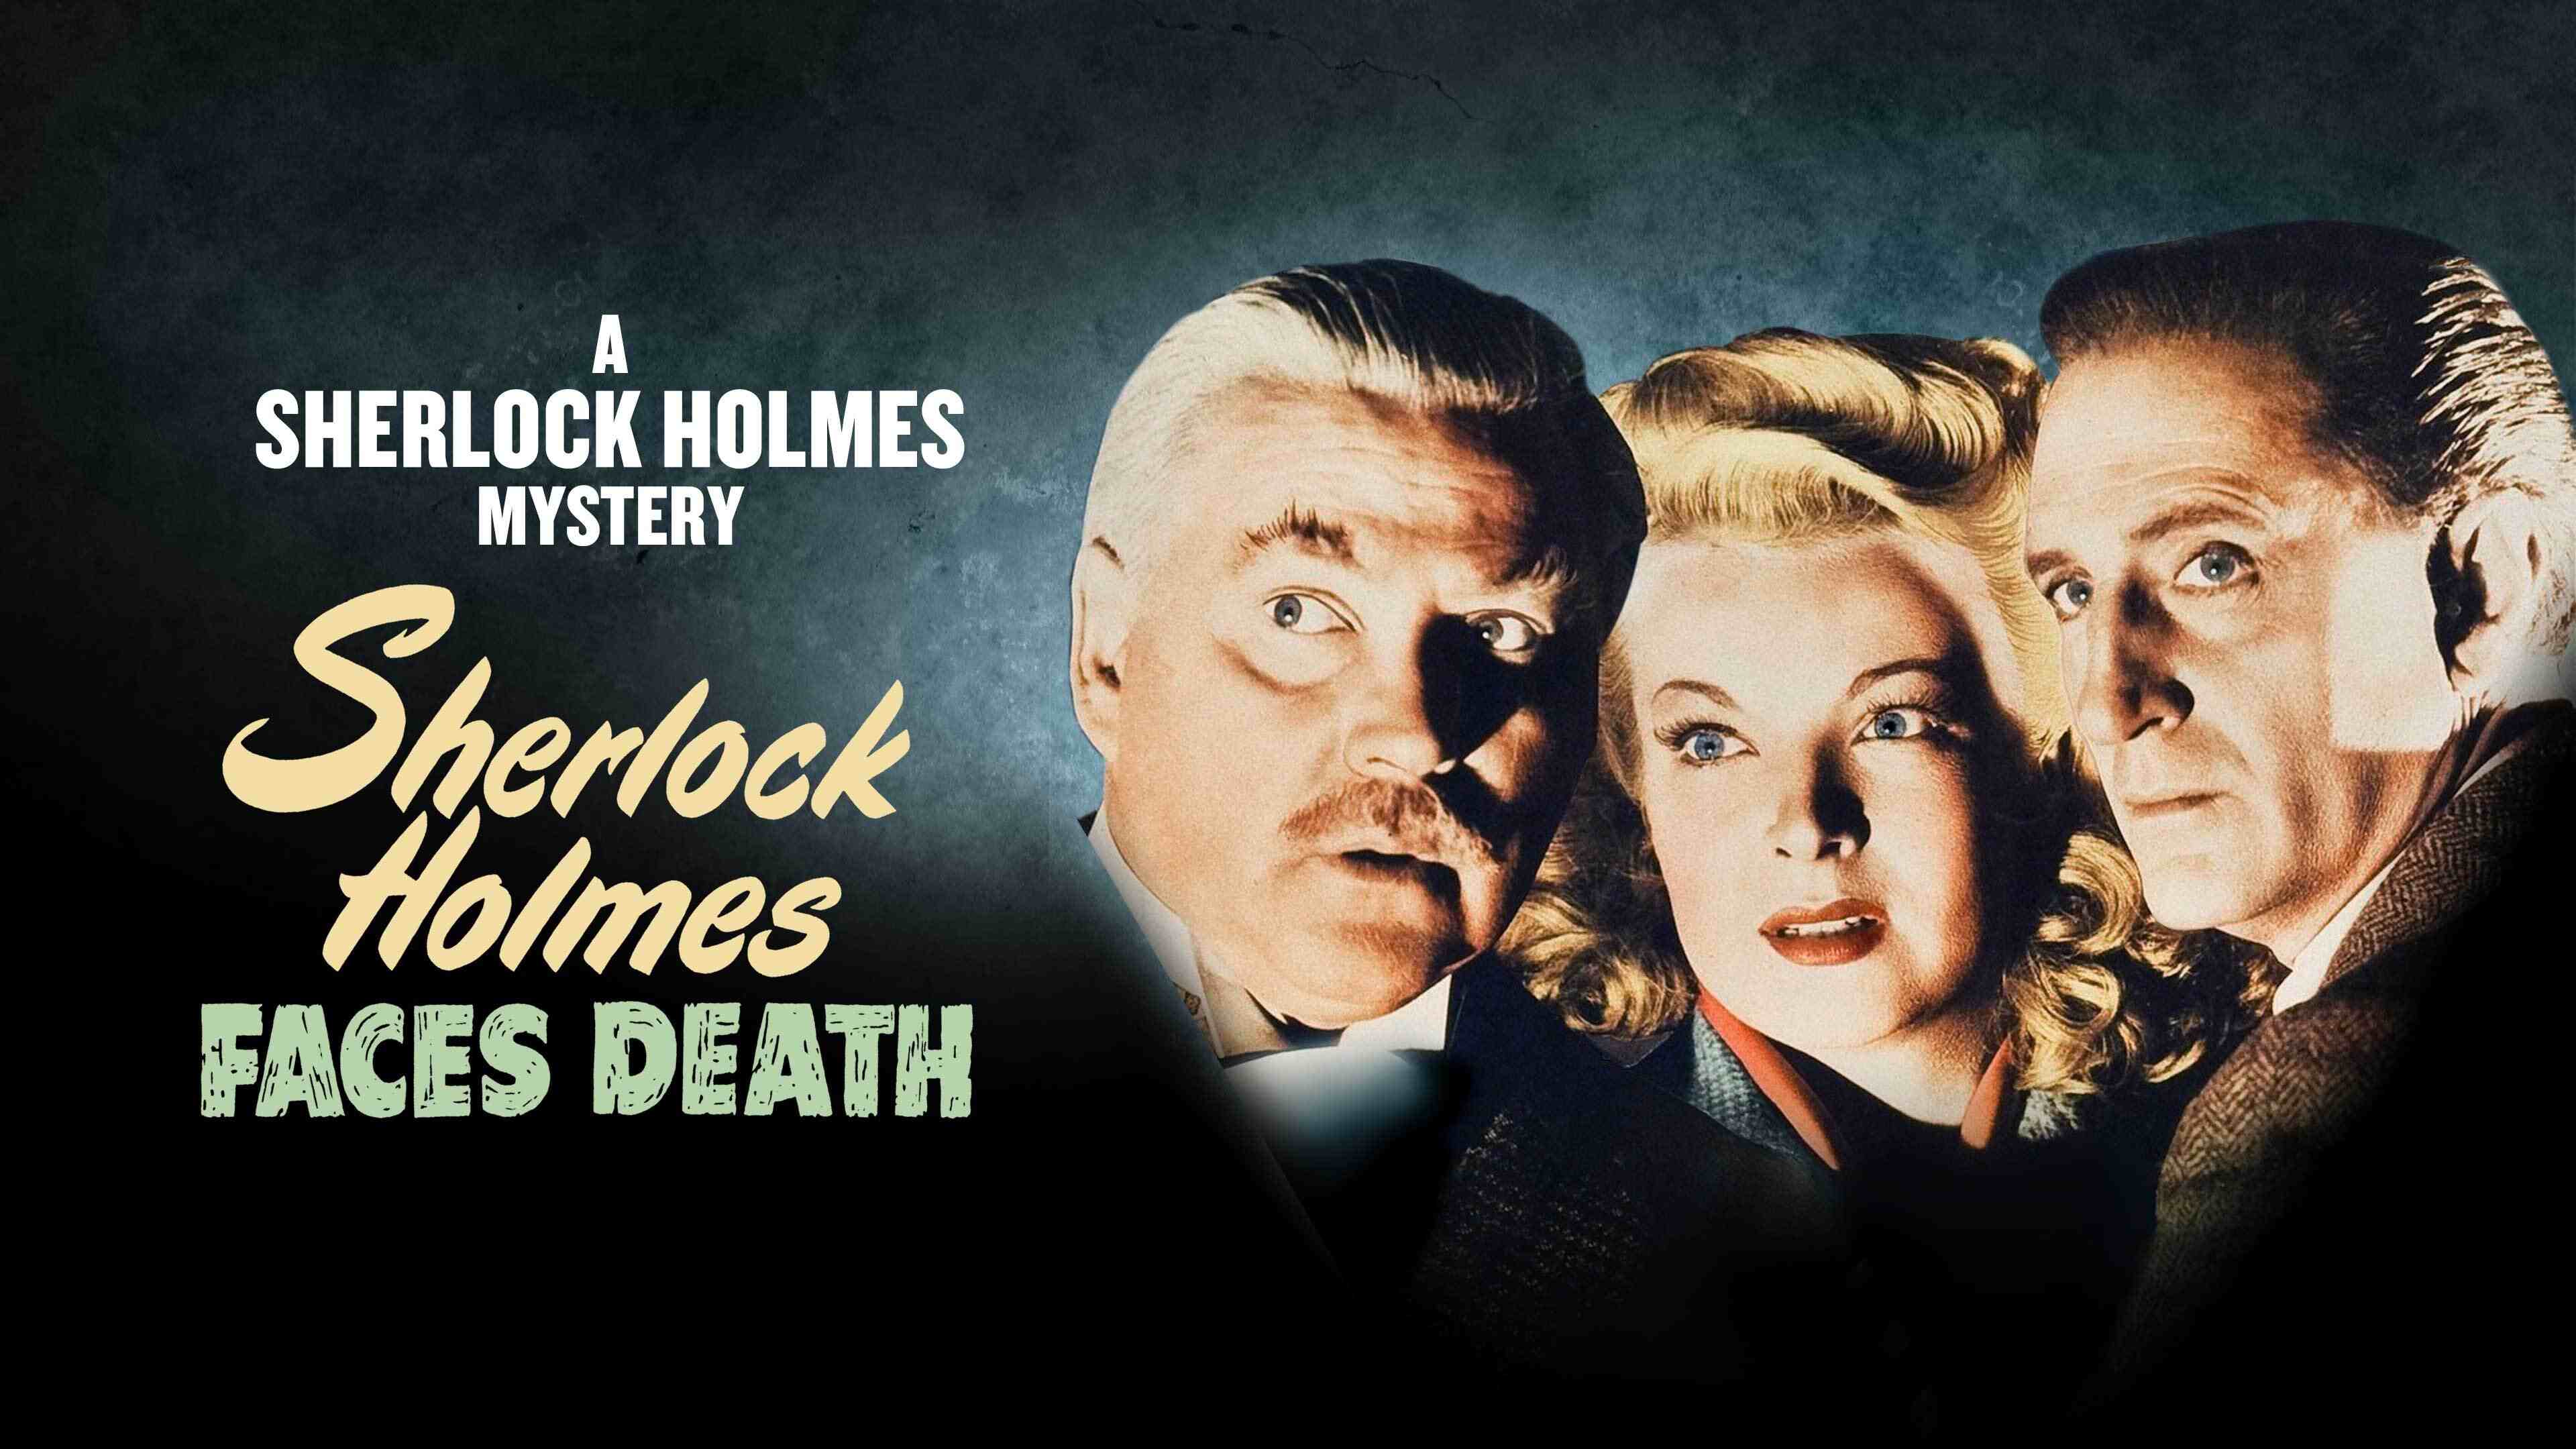 35-facts-about-the-movie-sherlock-holmes-faces-death